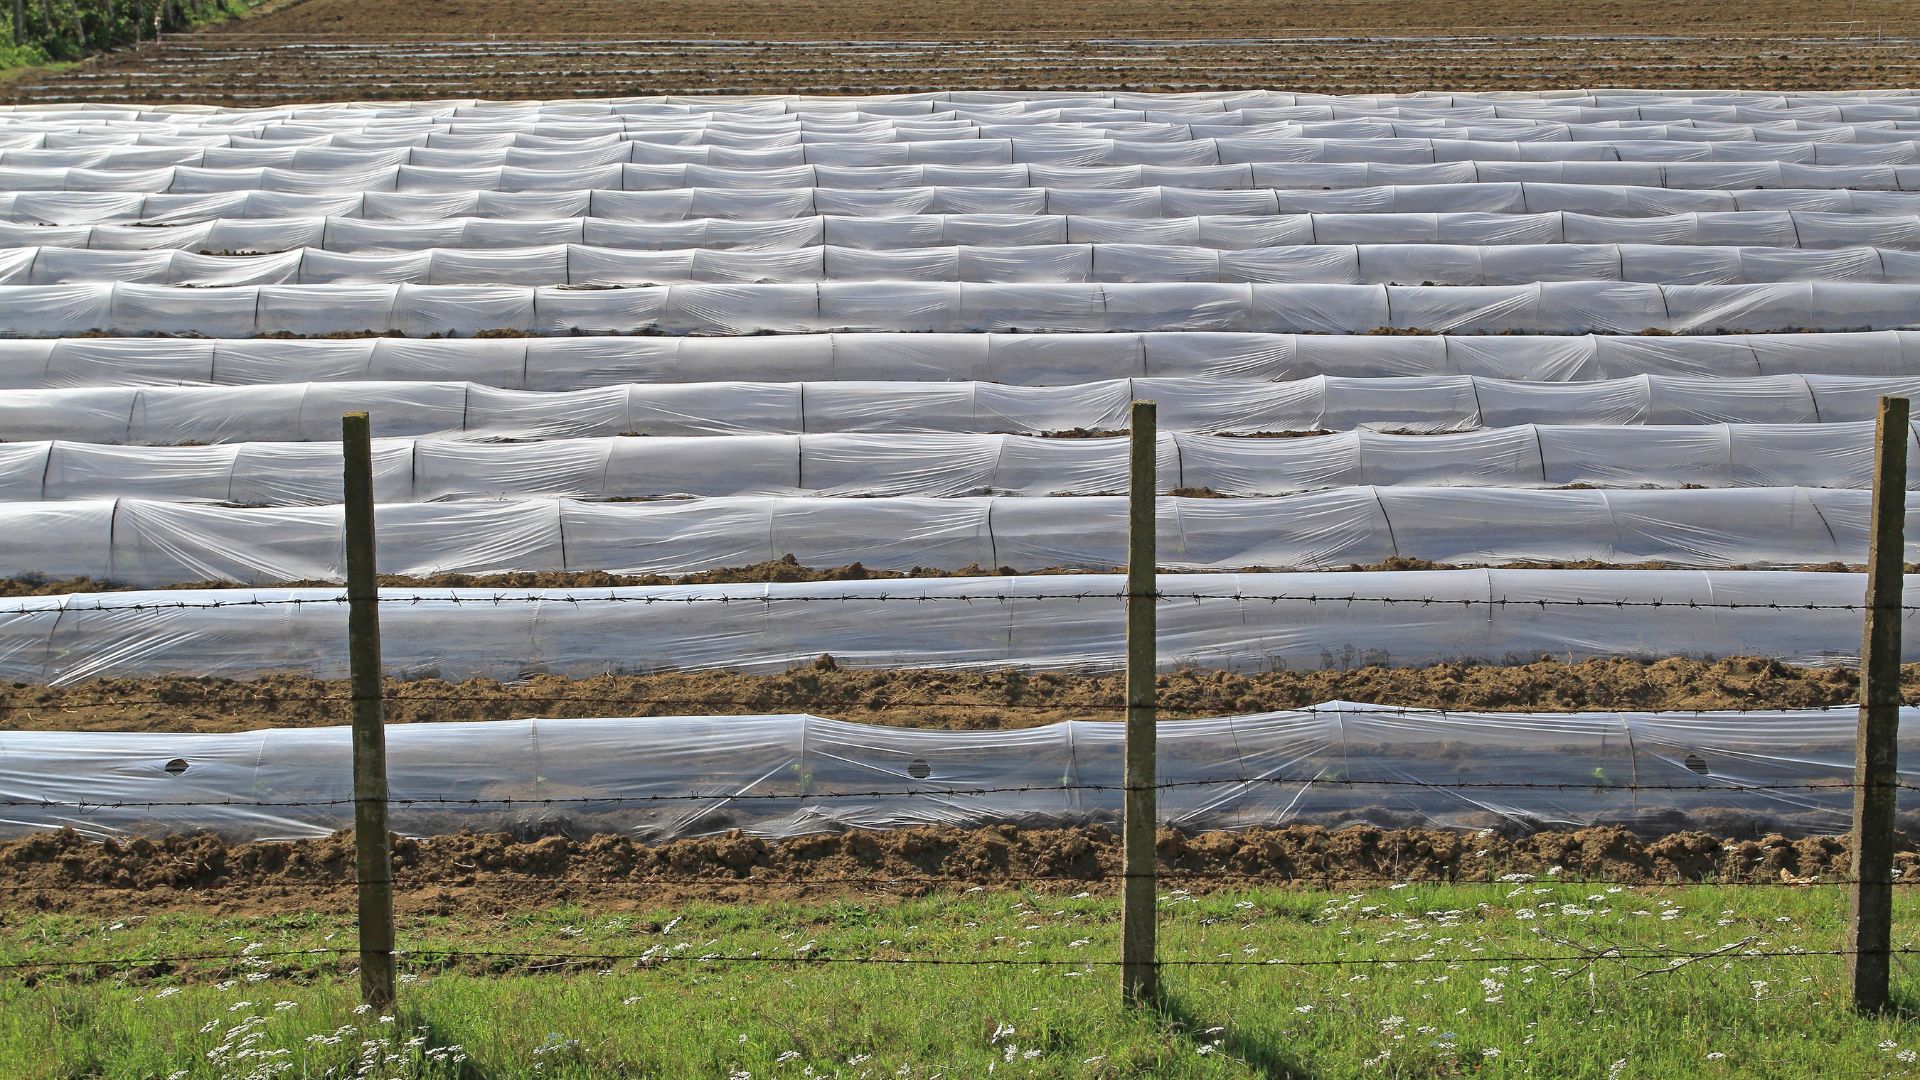 10 Steps For Installing Floating Row Covers To Prolong Your Growing Season